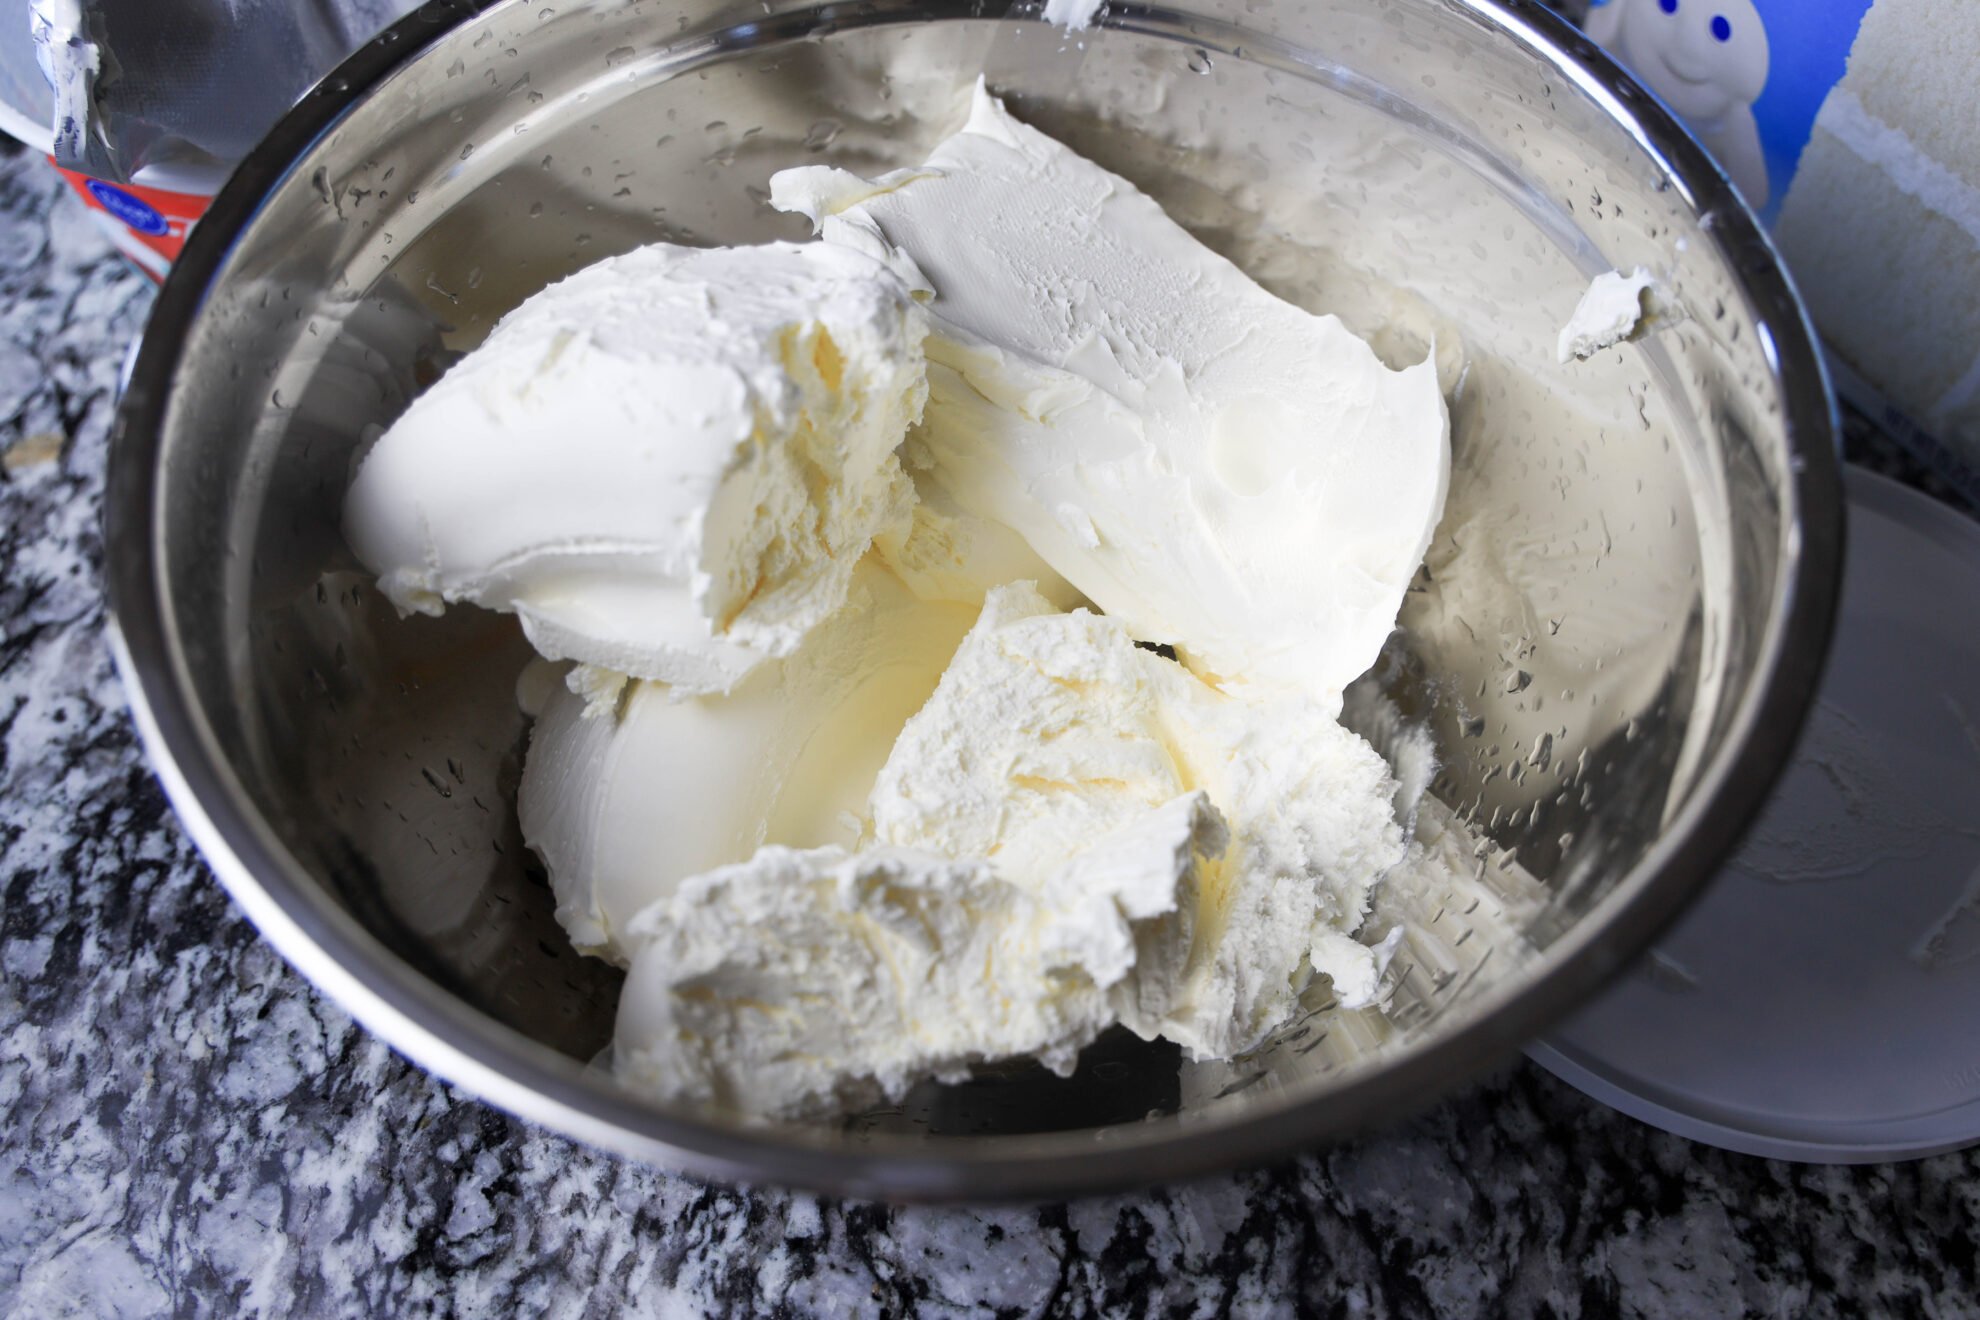 mix together cream cheese and whipped cream